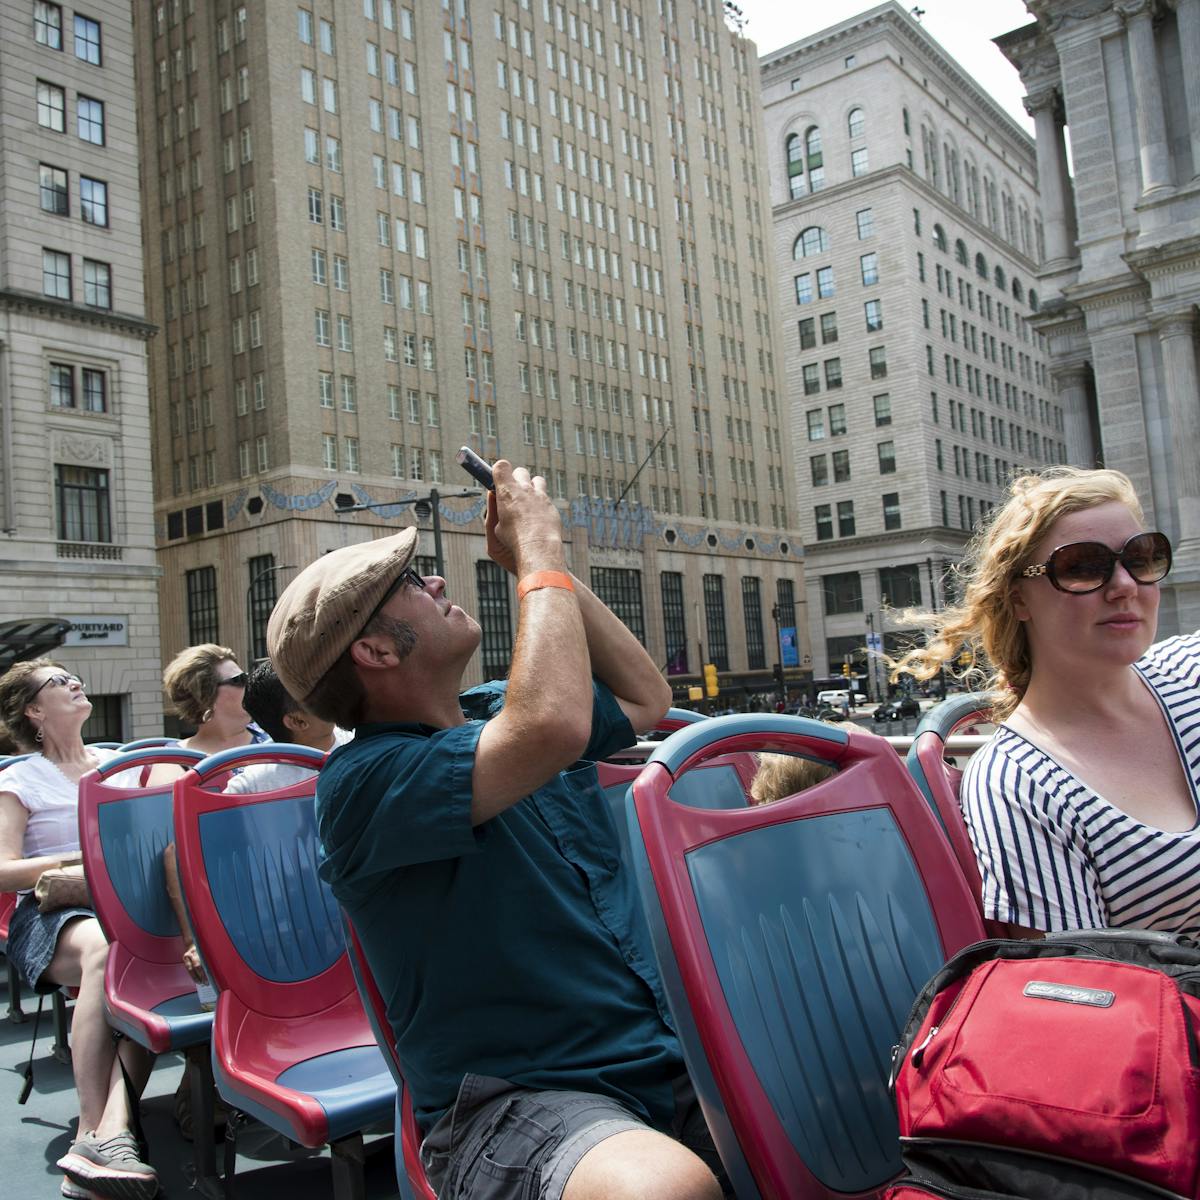 Philadelphia Sightseeing Tours passengers taking pictures of the city on the tour